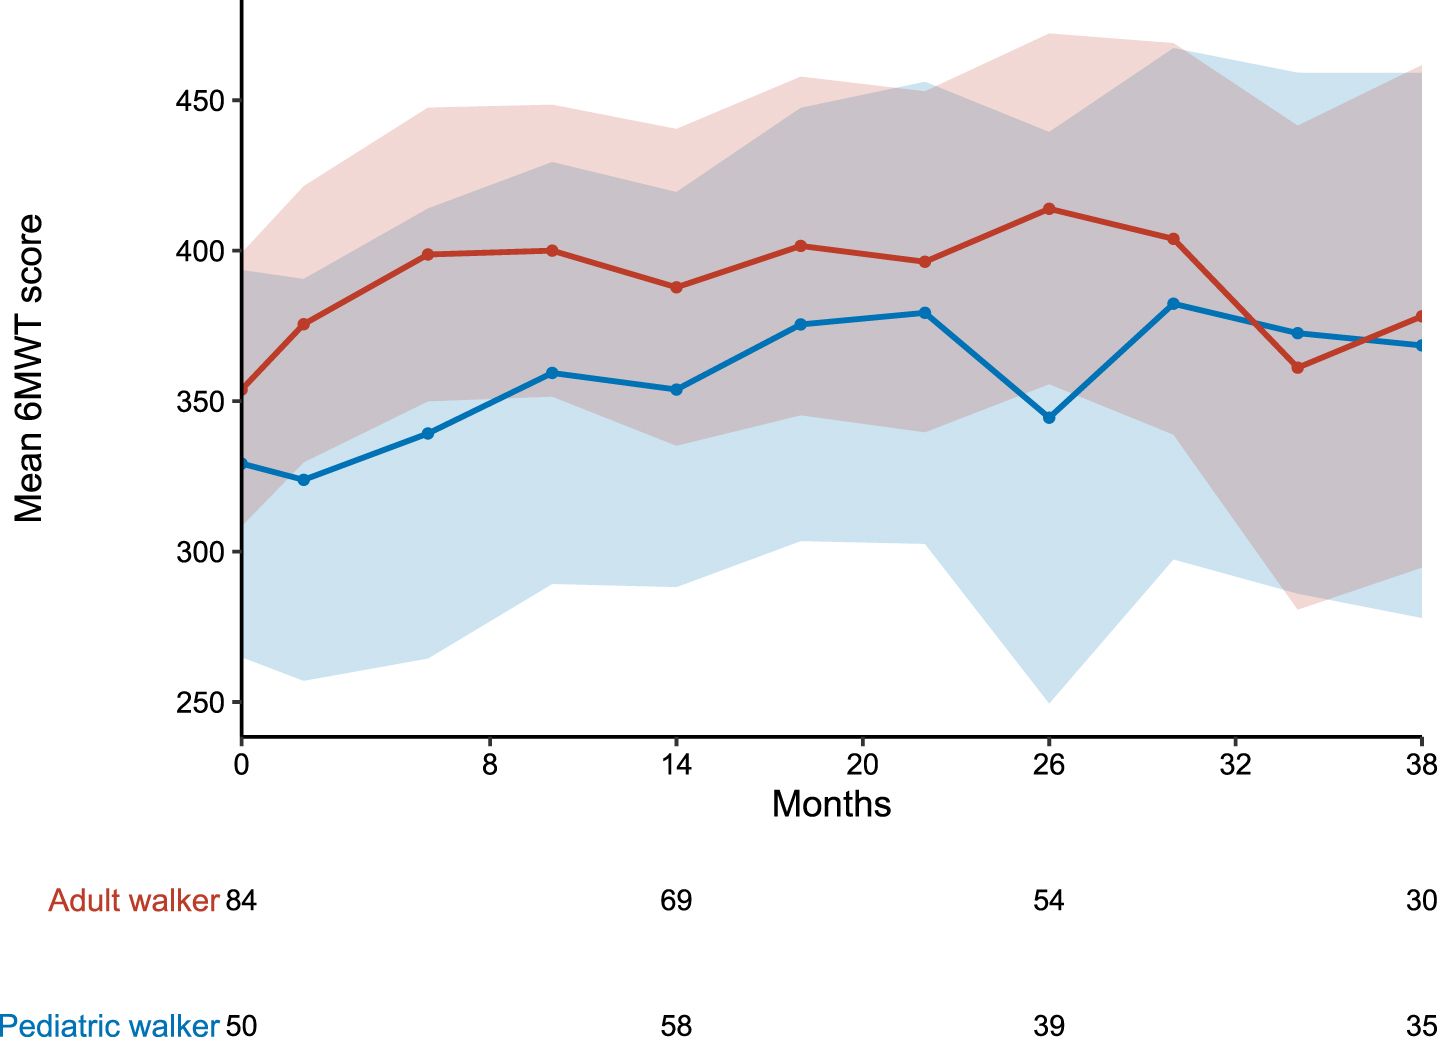 Longitudinal progression of the 6MWT. 6MWT for pediatric (blue) and adult (red) walkers. Data are listed as mean and 99% confidence interval. Available patients at baseline, m14, m26 and m38 are added. For a group size fewer than 10 patients no data are shown. As the performance of the 6MWT is not mandatory within the SMArtCARE data collection, data are not available for all patients at all time-points.